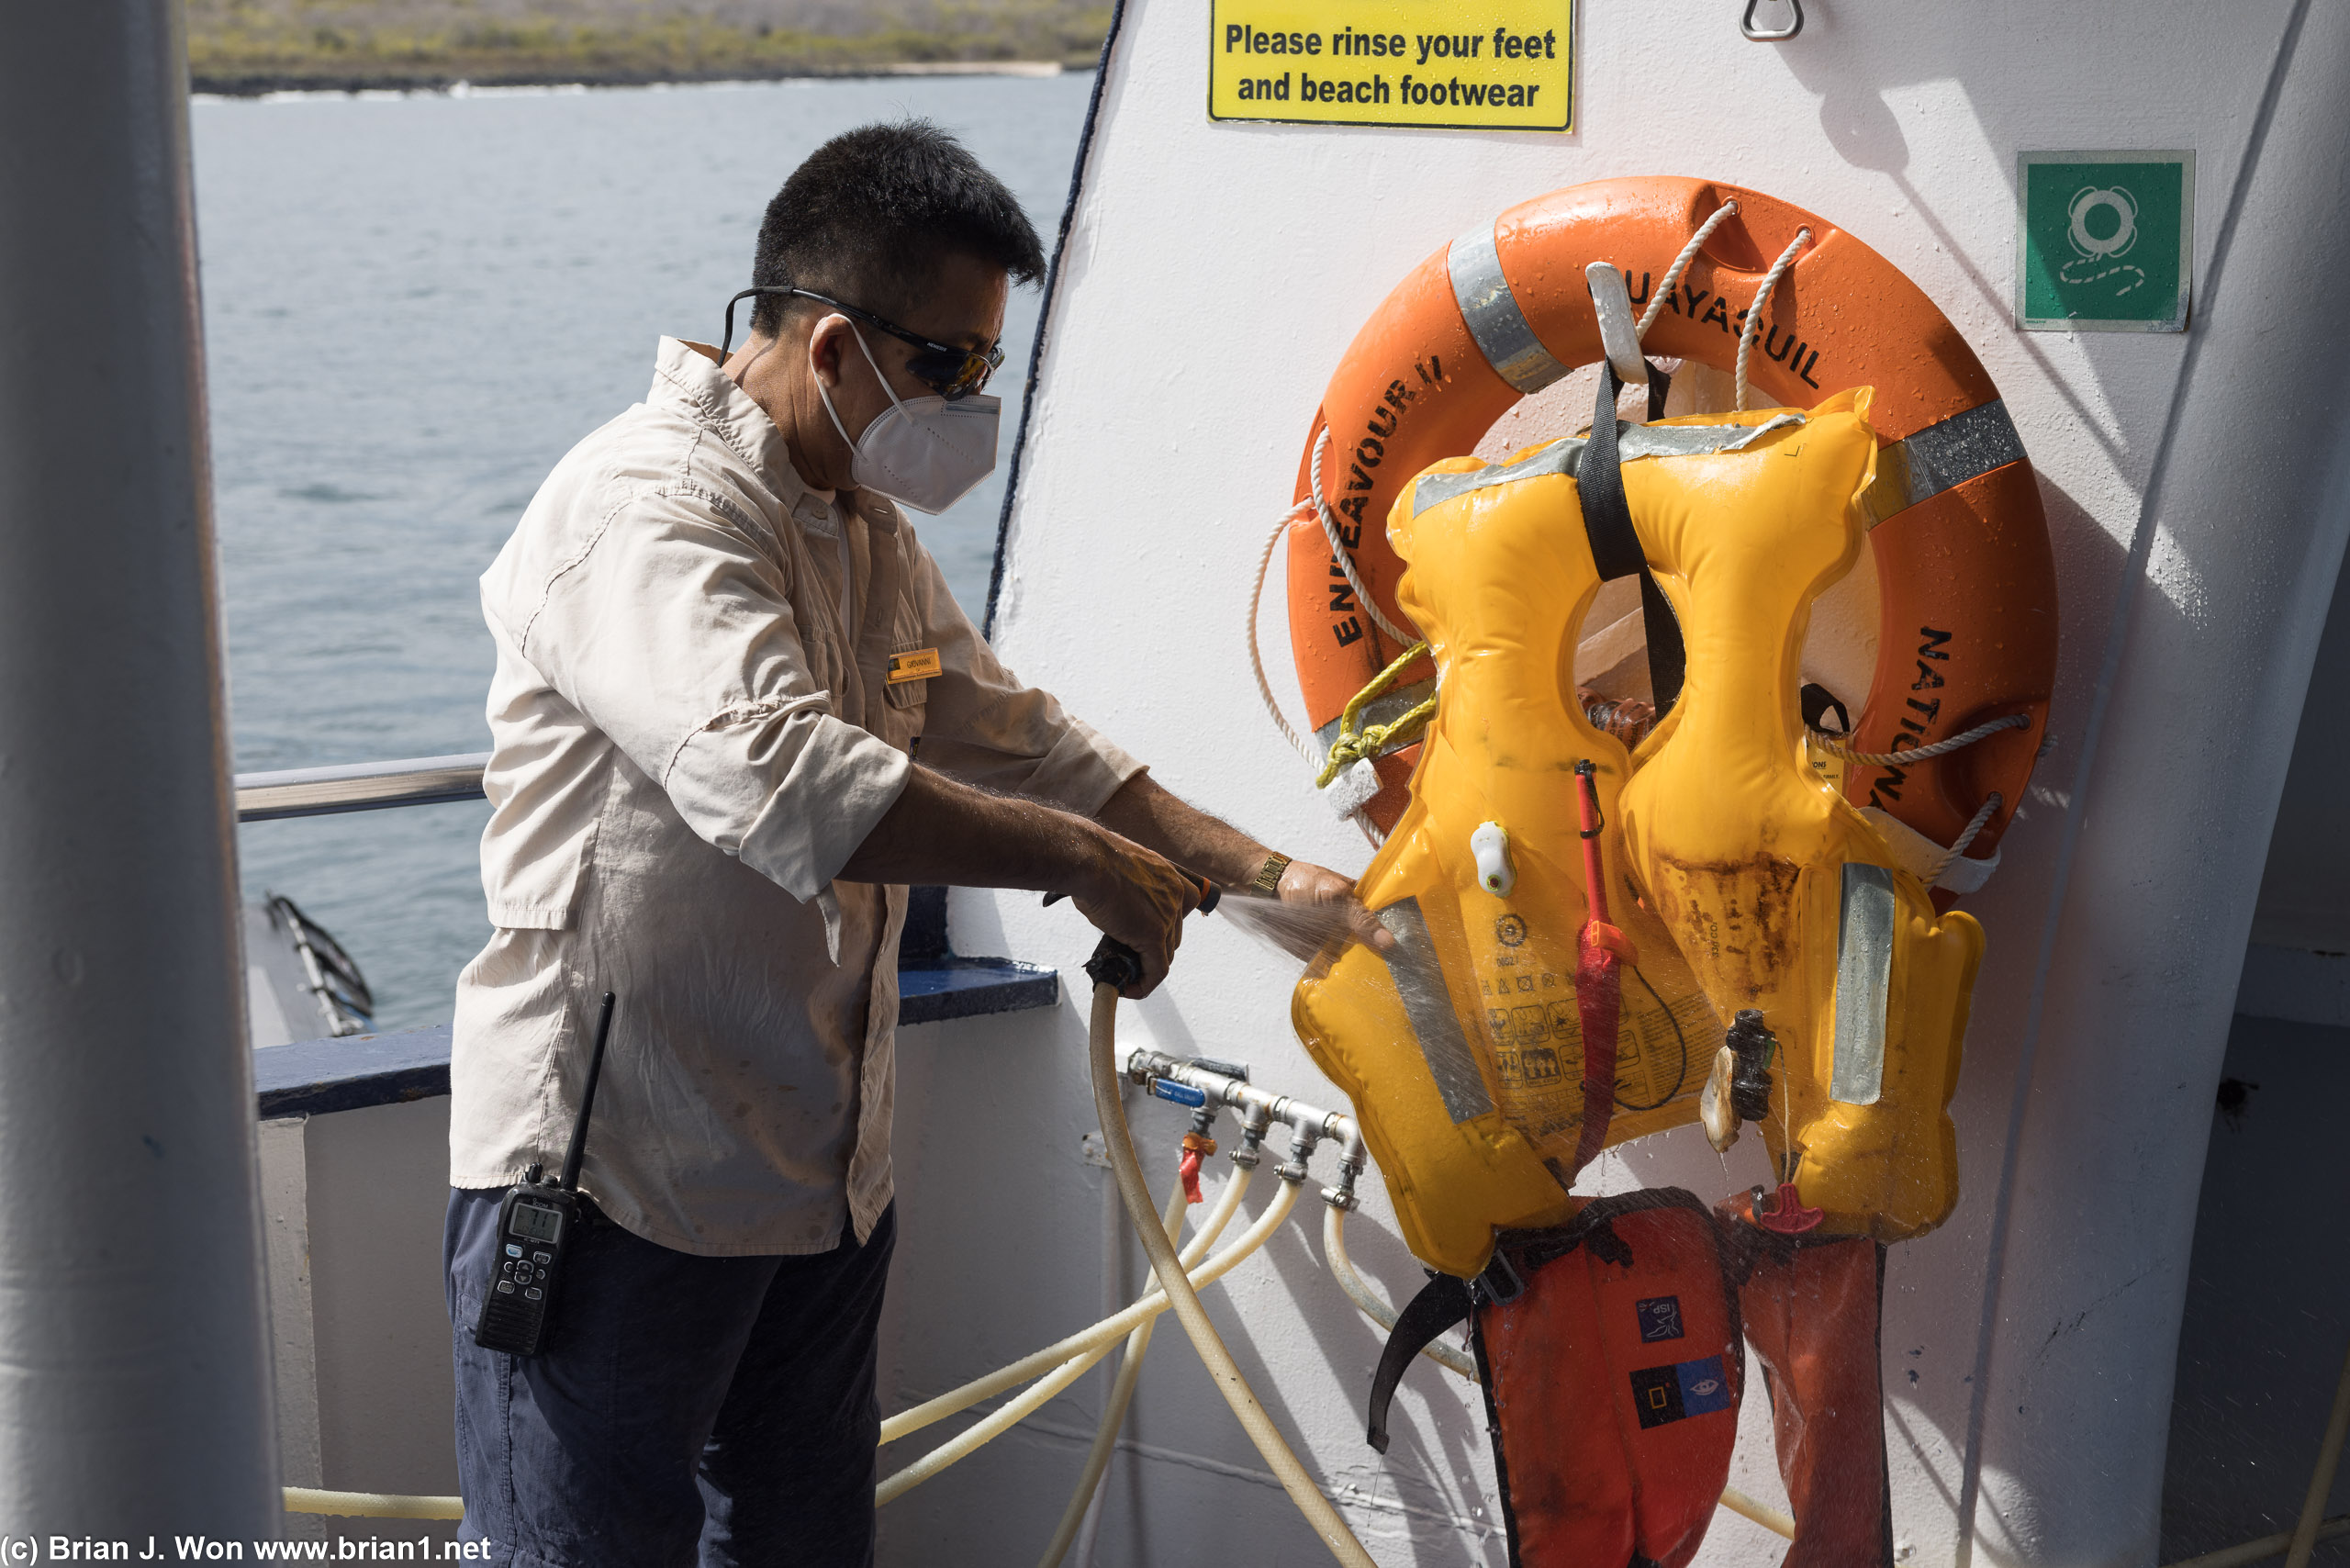 Another passenger accidentially activated a life preserver. Giovanni's cleaning it up to be repacked and reused.